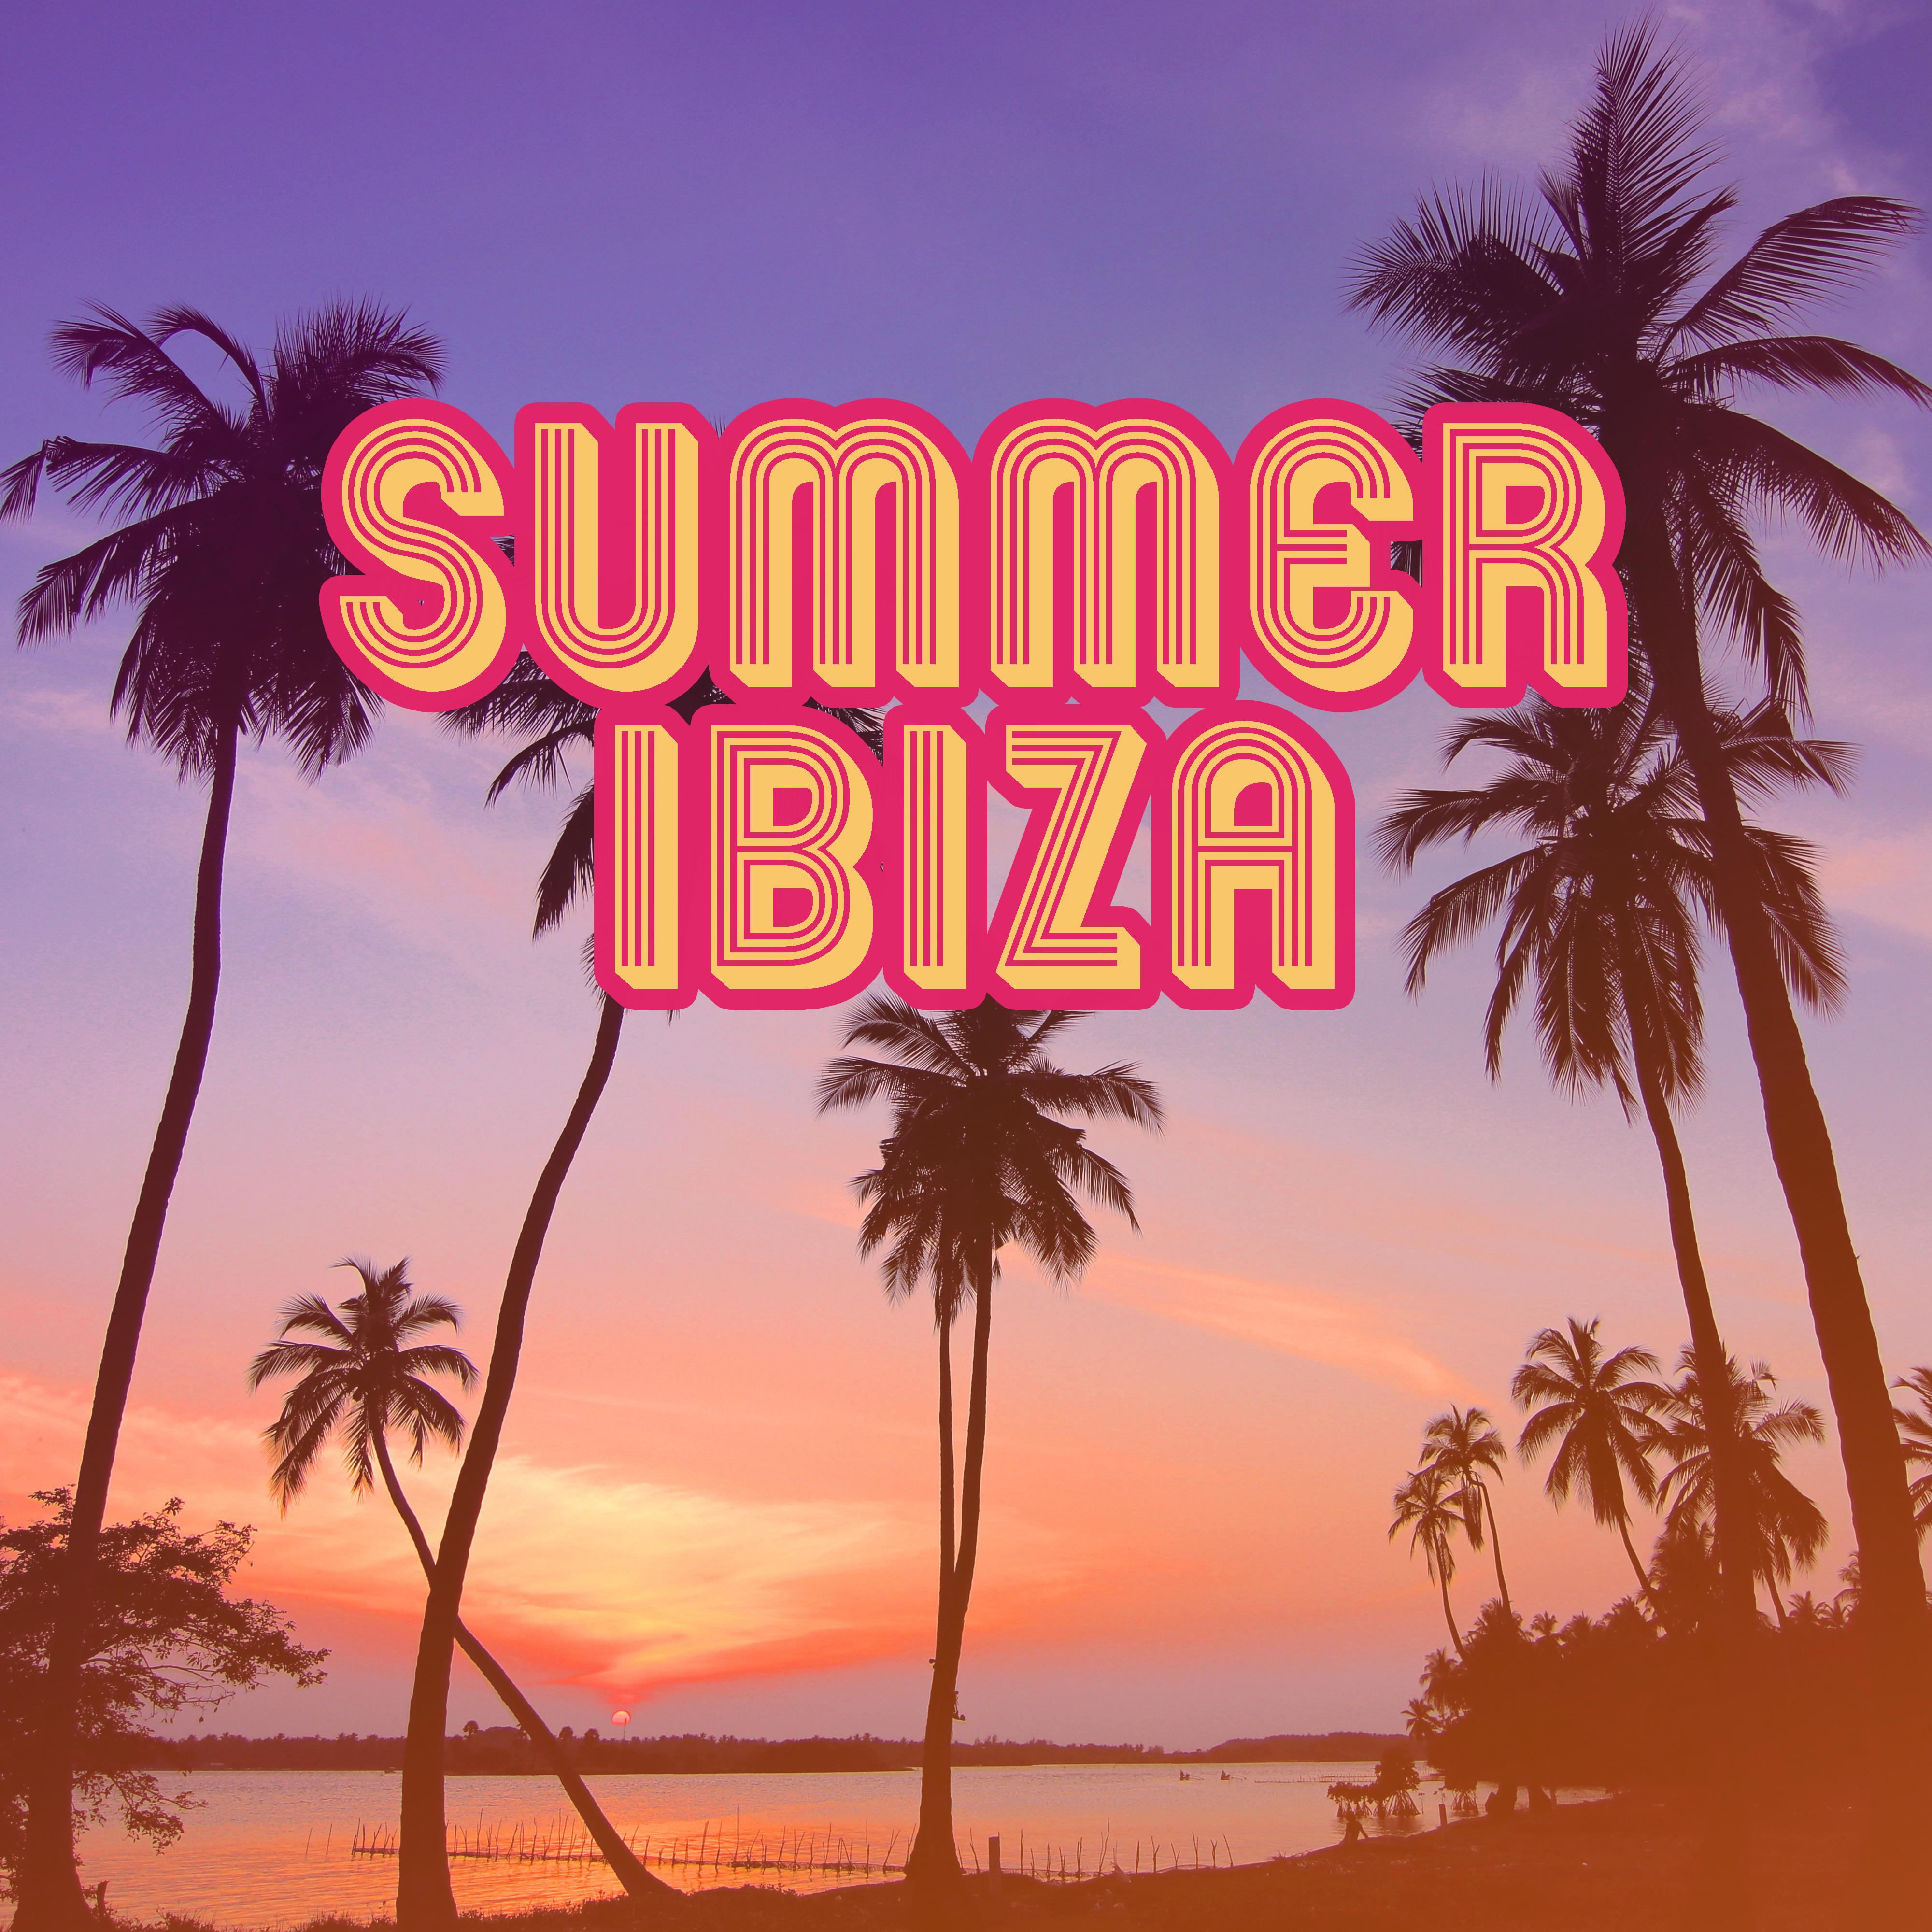 Summer Ibiza  Chill Out 2017, Relax  Chill, Vacation Hits, Dance Party on the Beach